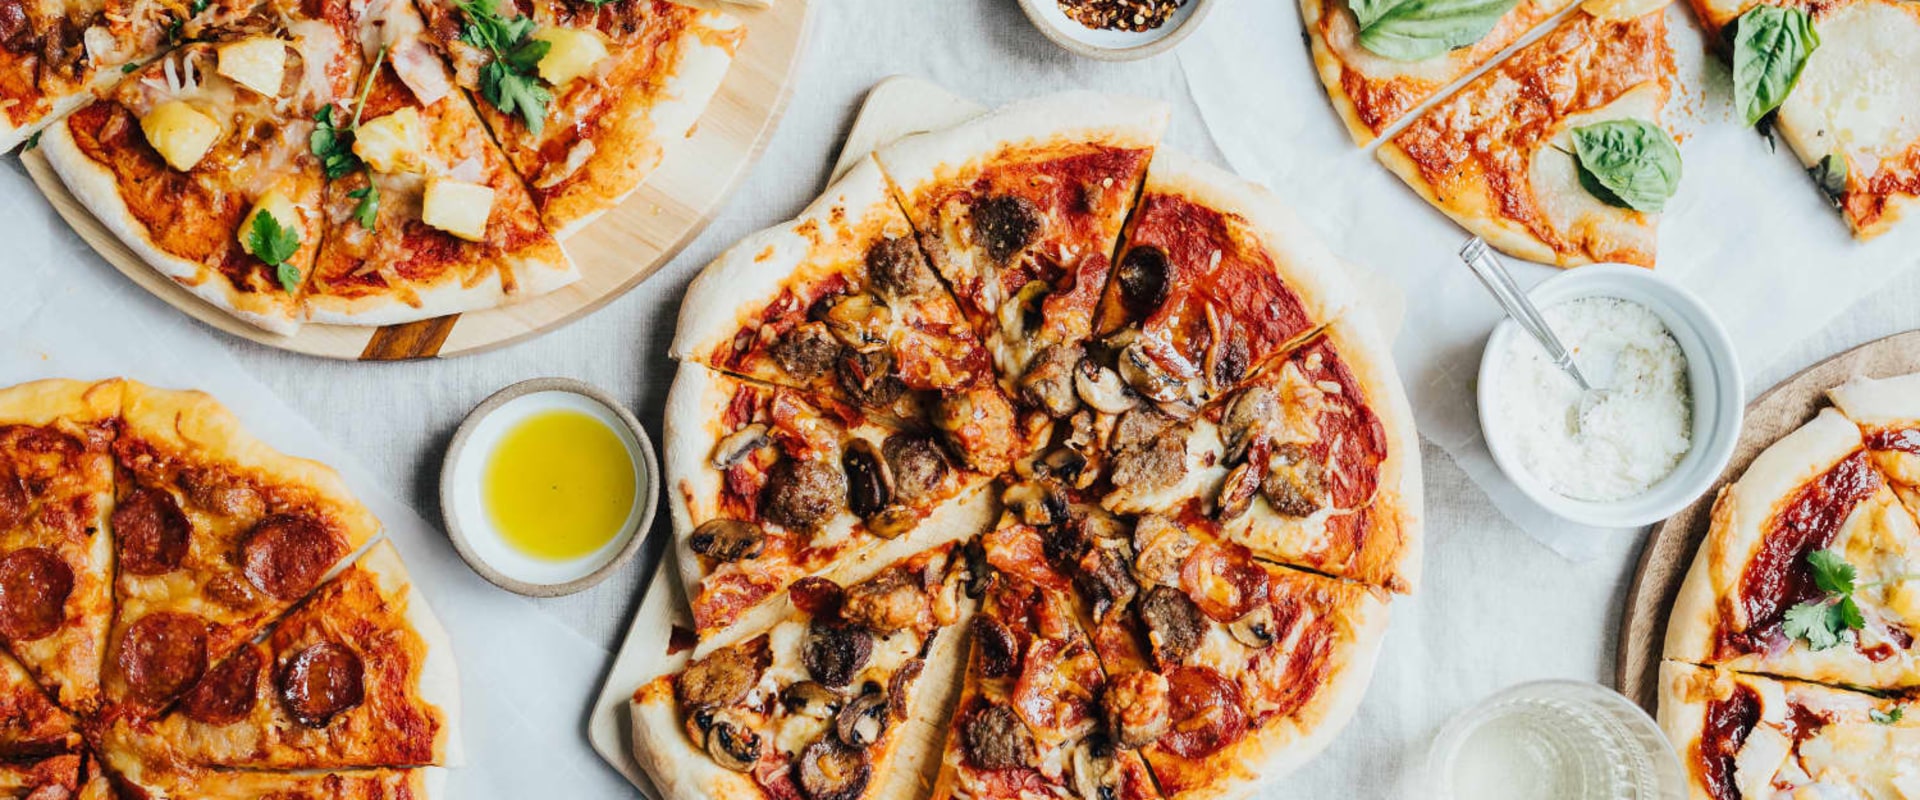 What is the Most Popular Specialty Pizza?